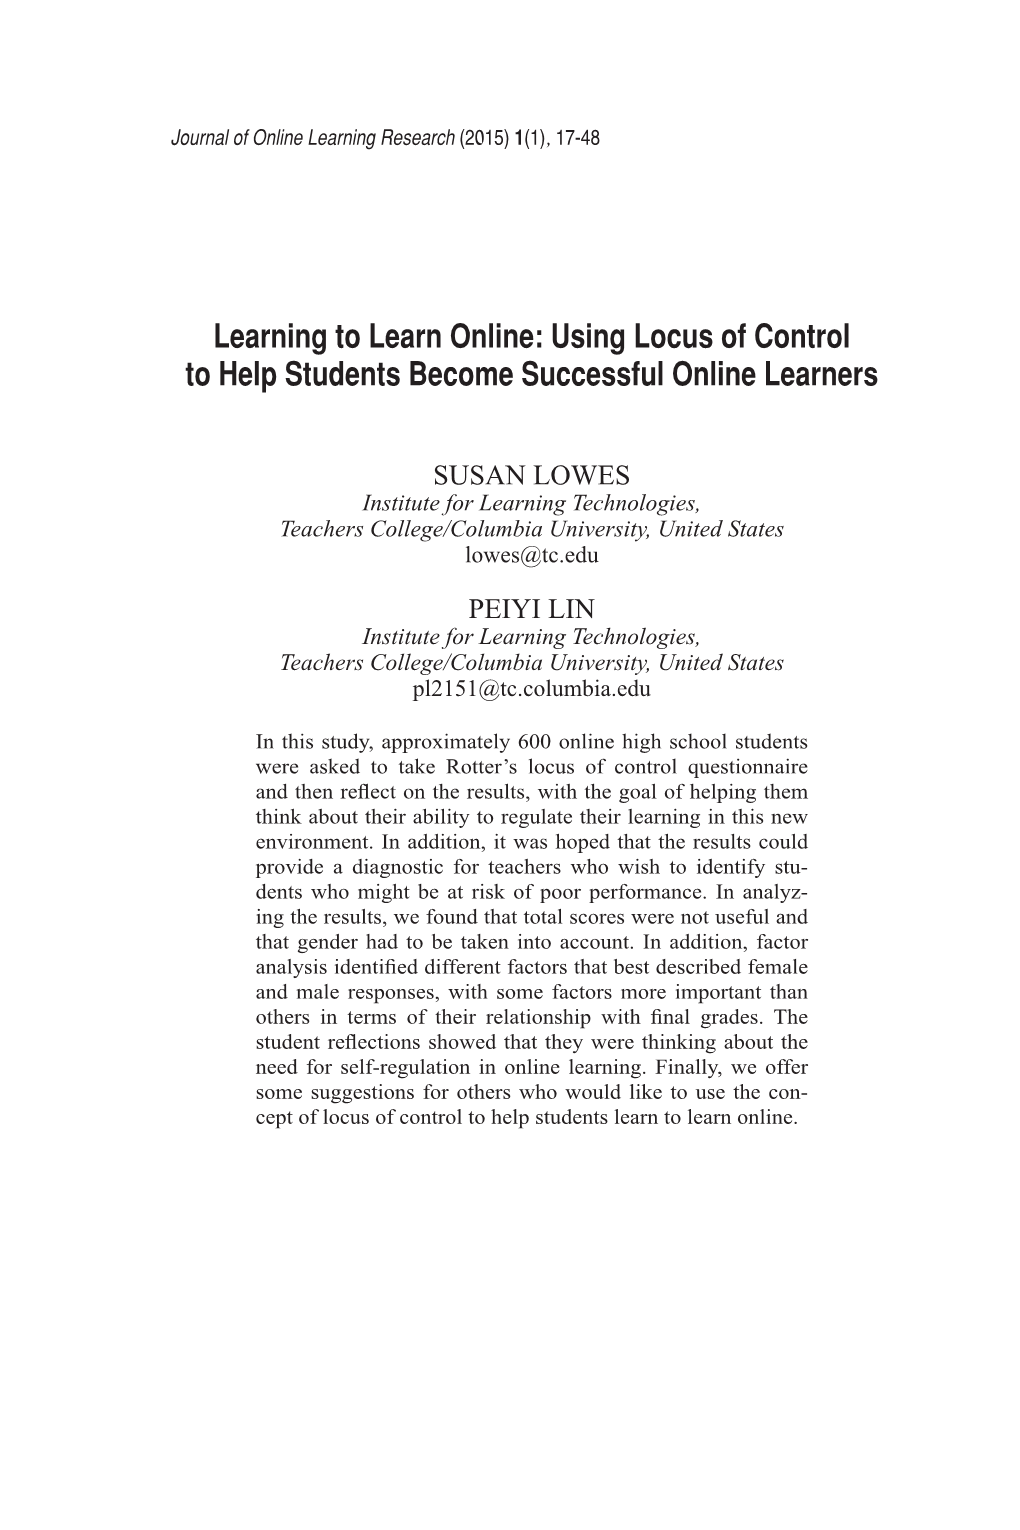 Learning to Learn Online: Using Locus of Control to Help Students Become Successful Online Learners